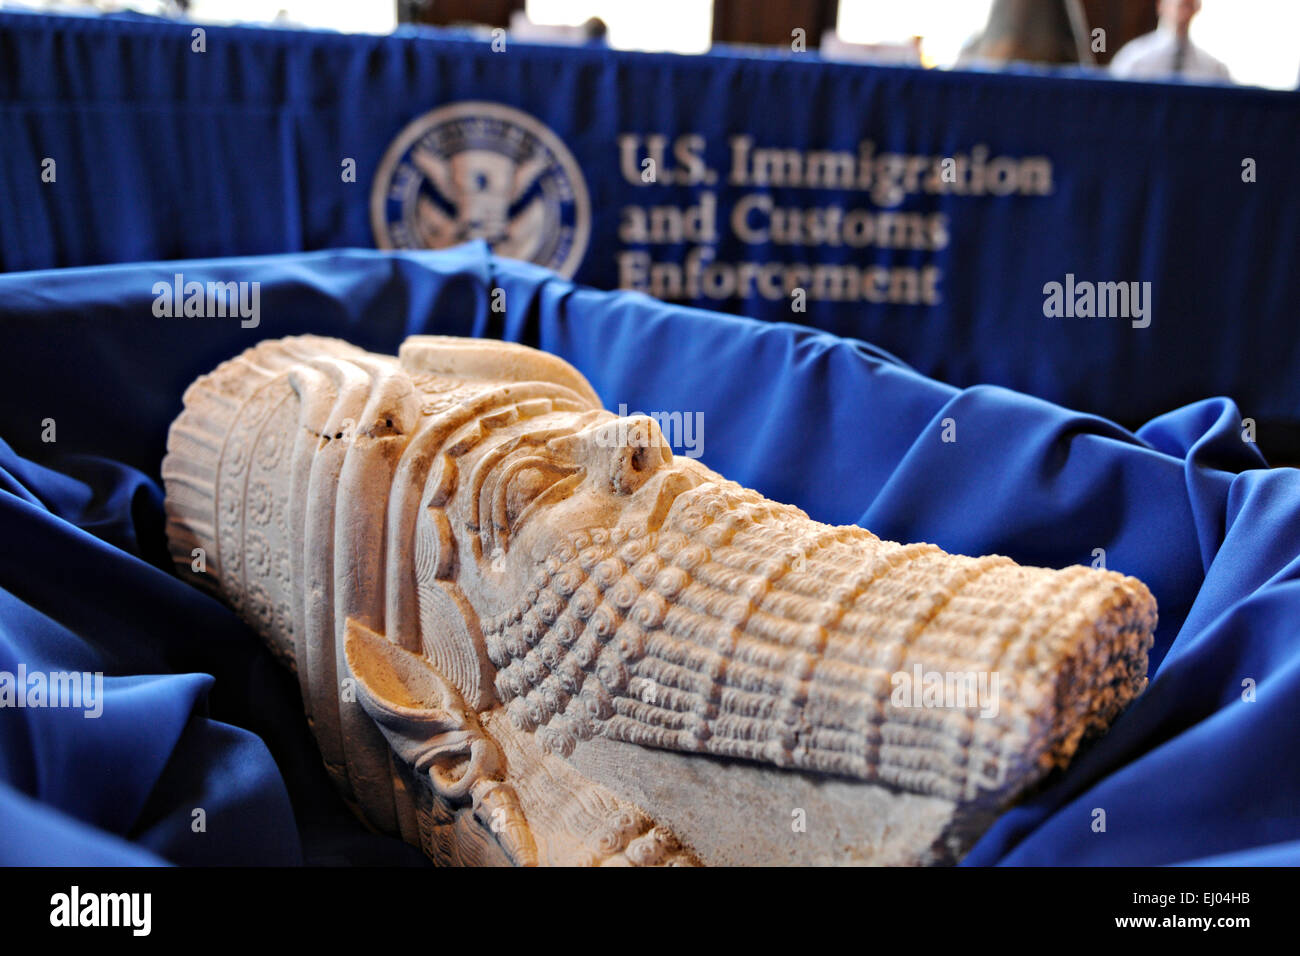 A limestone head of the Assyrian king Sargon II smuggled into the United States before being shipped back to Iraq after U.S. Immigration and Customs Enforcement seized the cultural treasures in a wide investigation March 16, 2014 in Washington, DC. More than 60 items believe looted by the Islamic State were returned in the investigation. Stock Photo